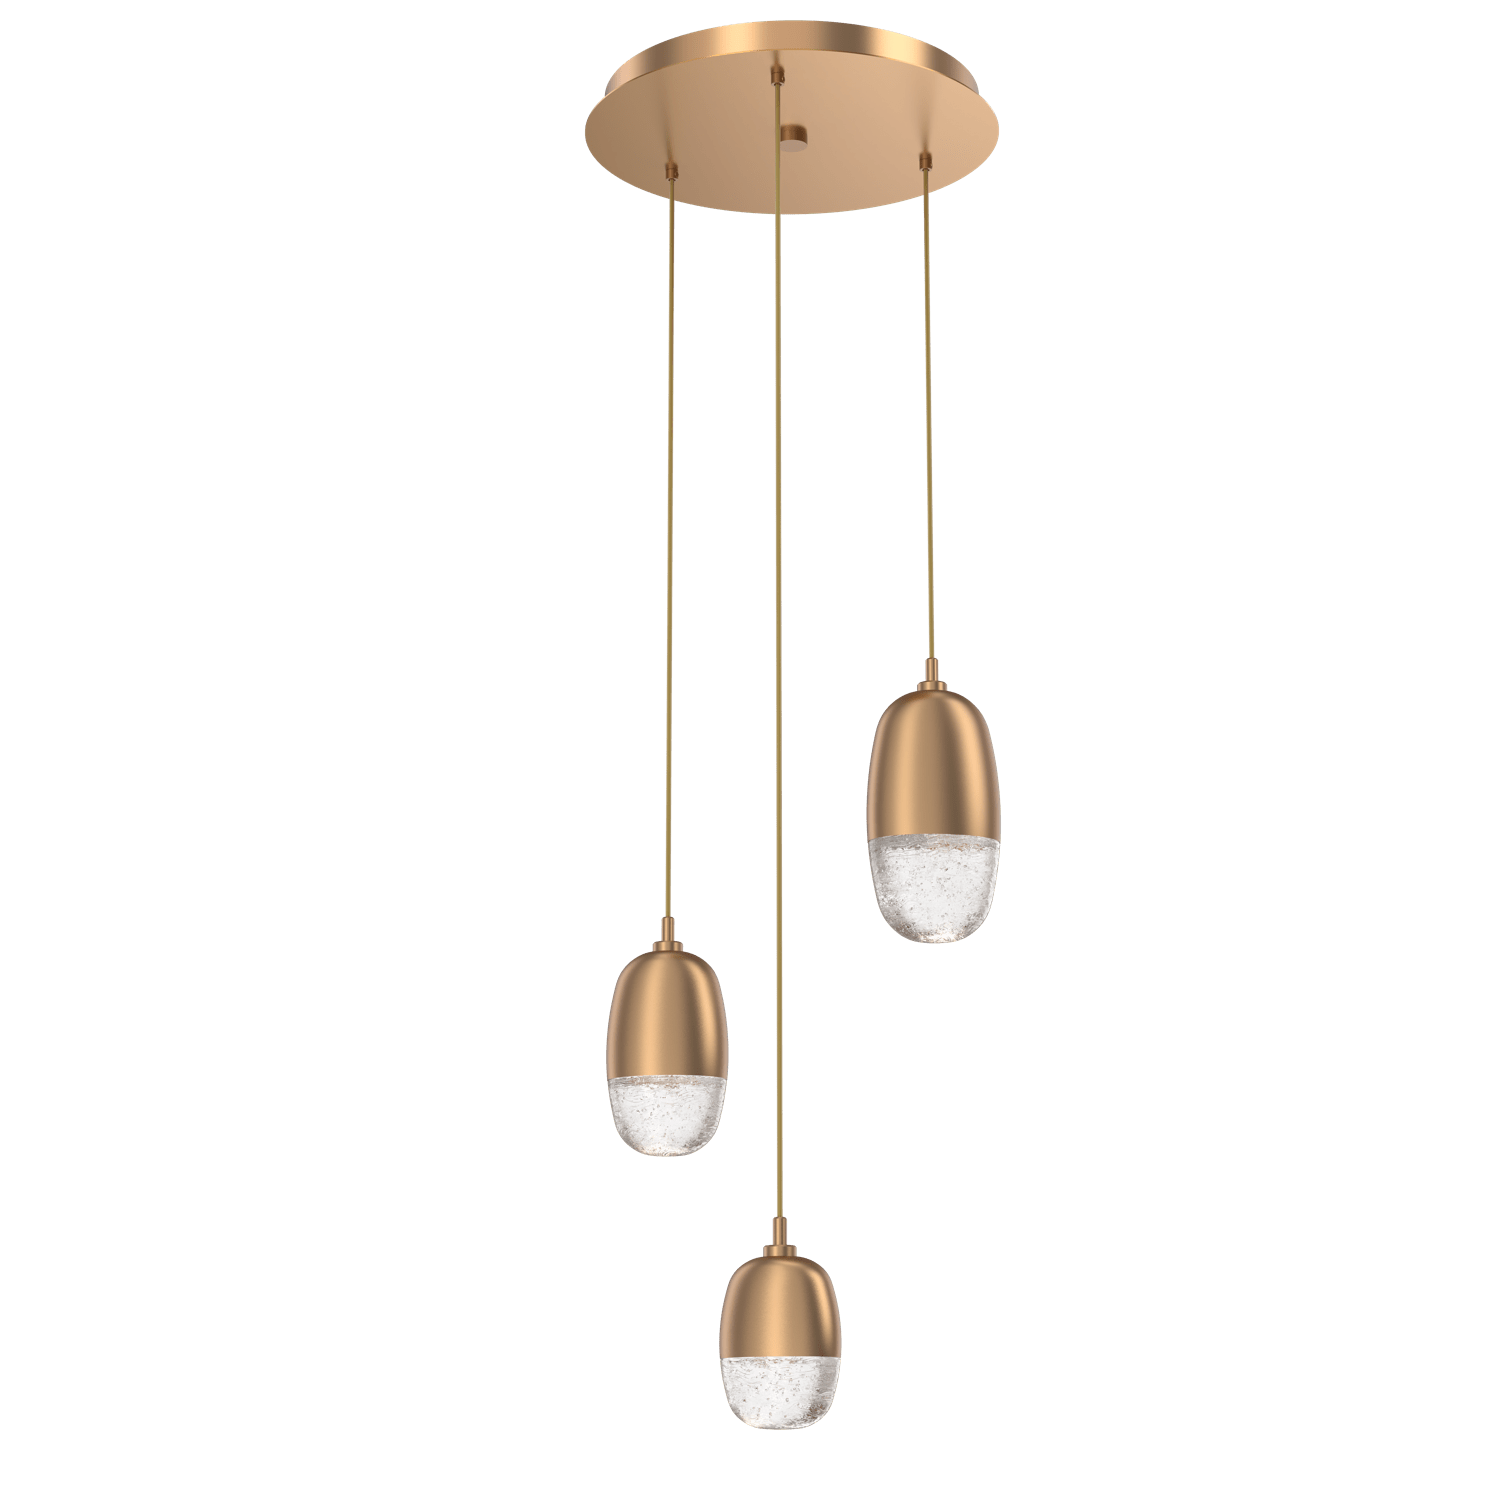 CHB0079-03-NB-Hammerton-Studio-Pebble-3-light-round-pendant-chandelier-with-novel-brass-finish-and-clear-cast-glass-shades-and-LED-lamping